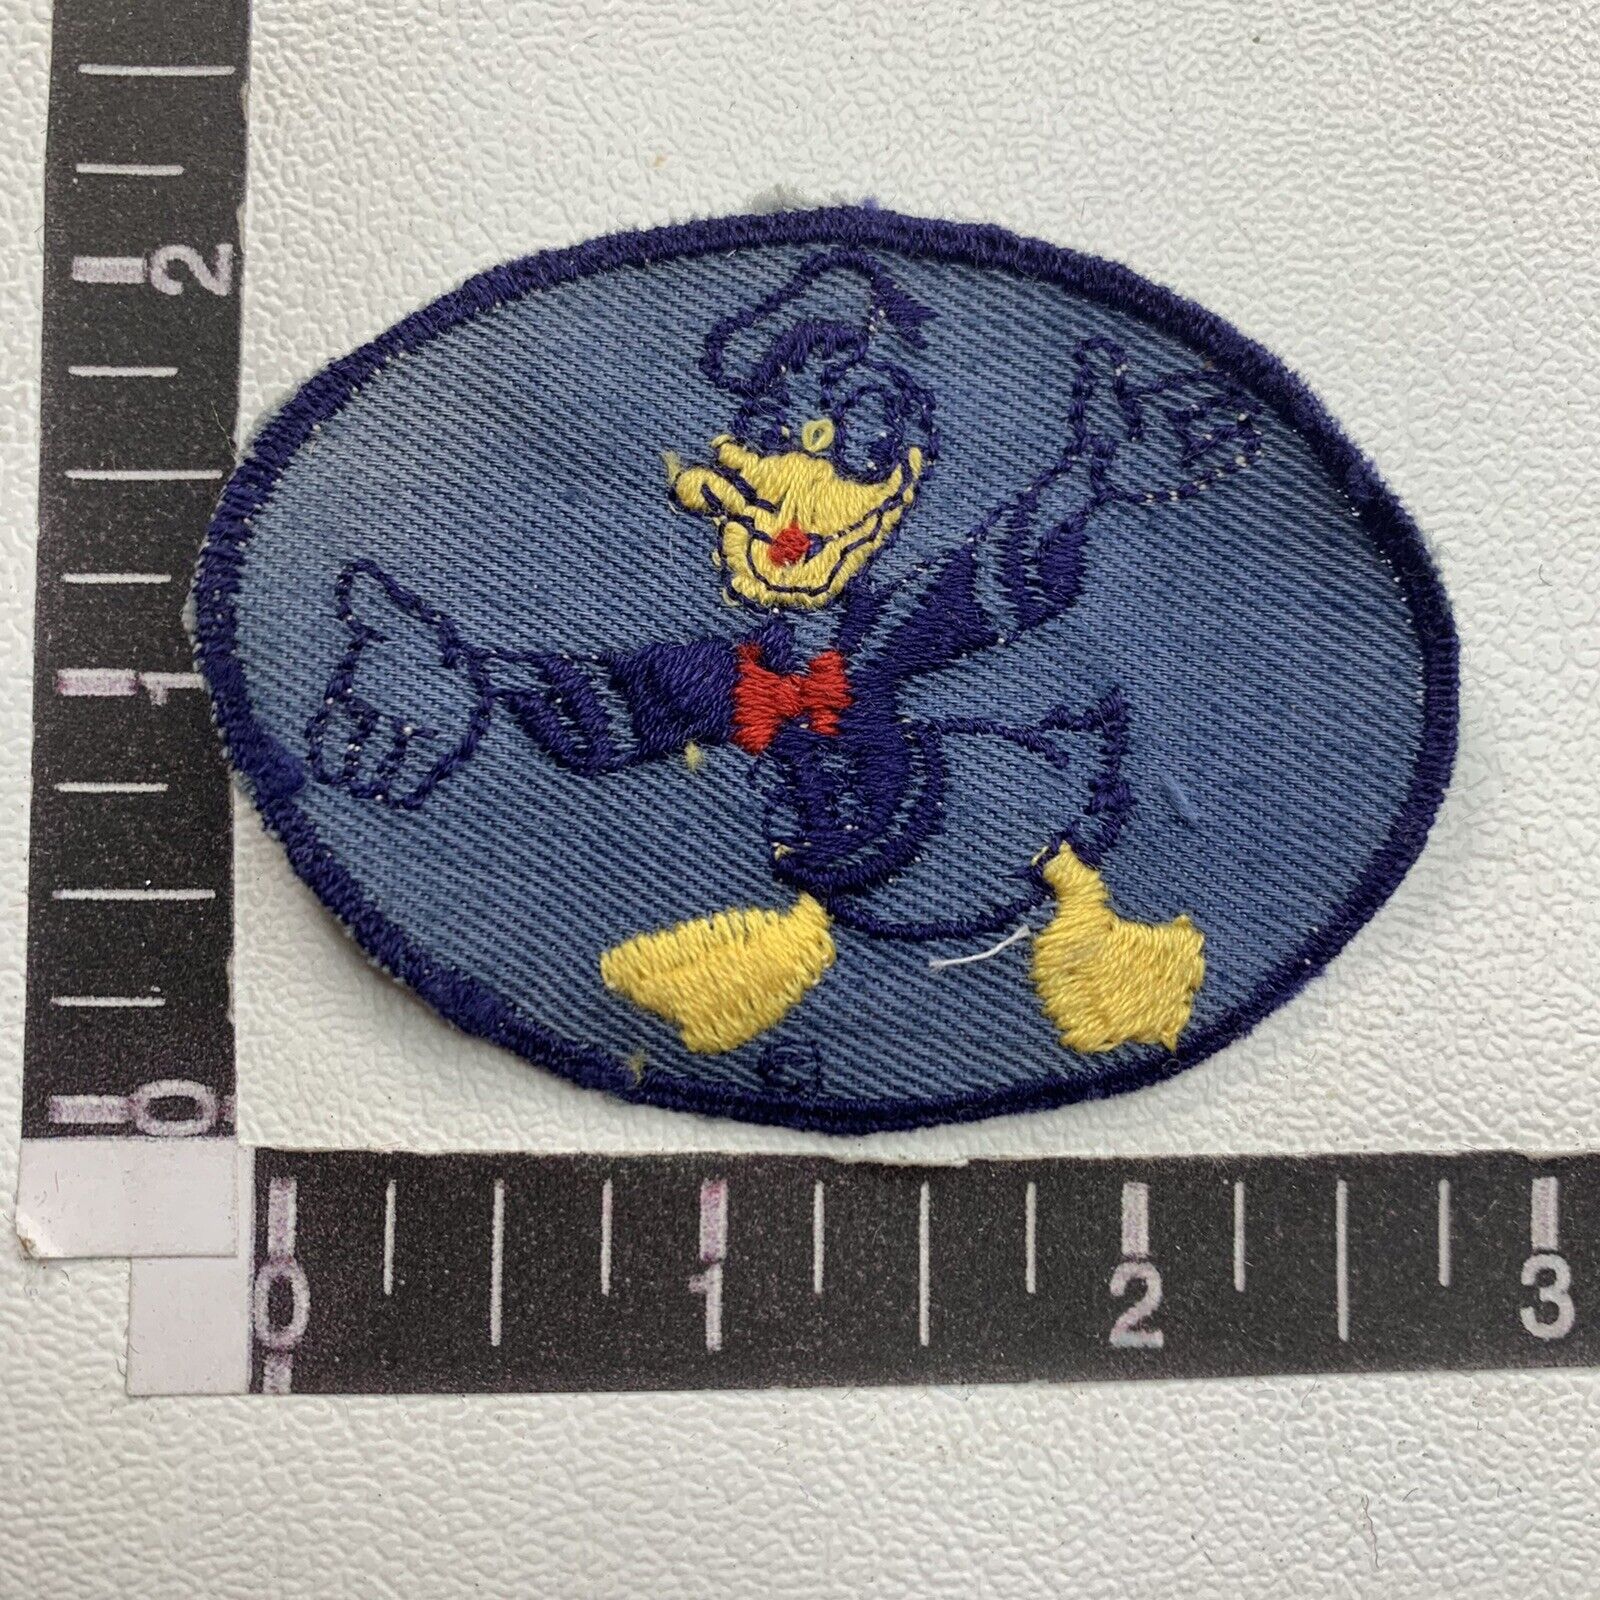 Vintage 1940s Disney DONALD DUCK Embroidered Blue Twill Patch Dk Blue Bdr 00Y2